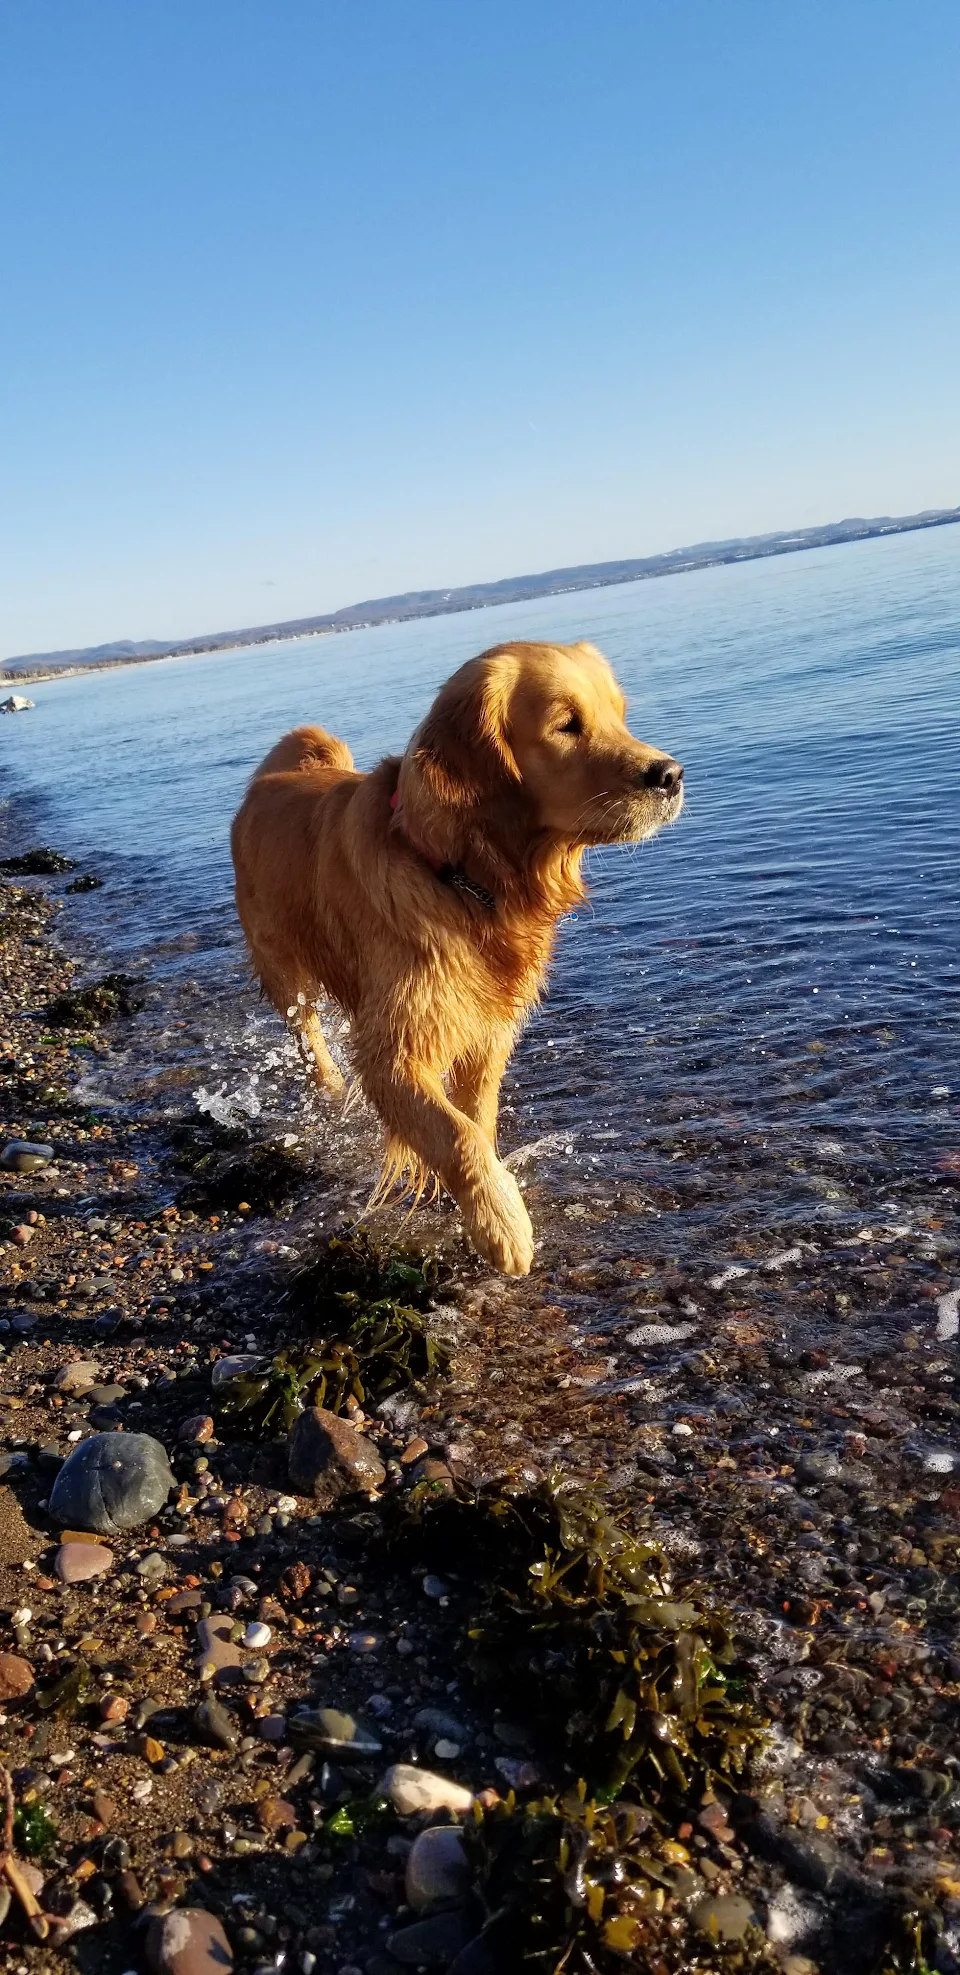 My beautiful dog by the sea this morning